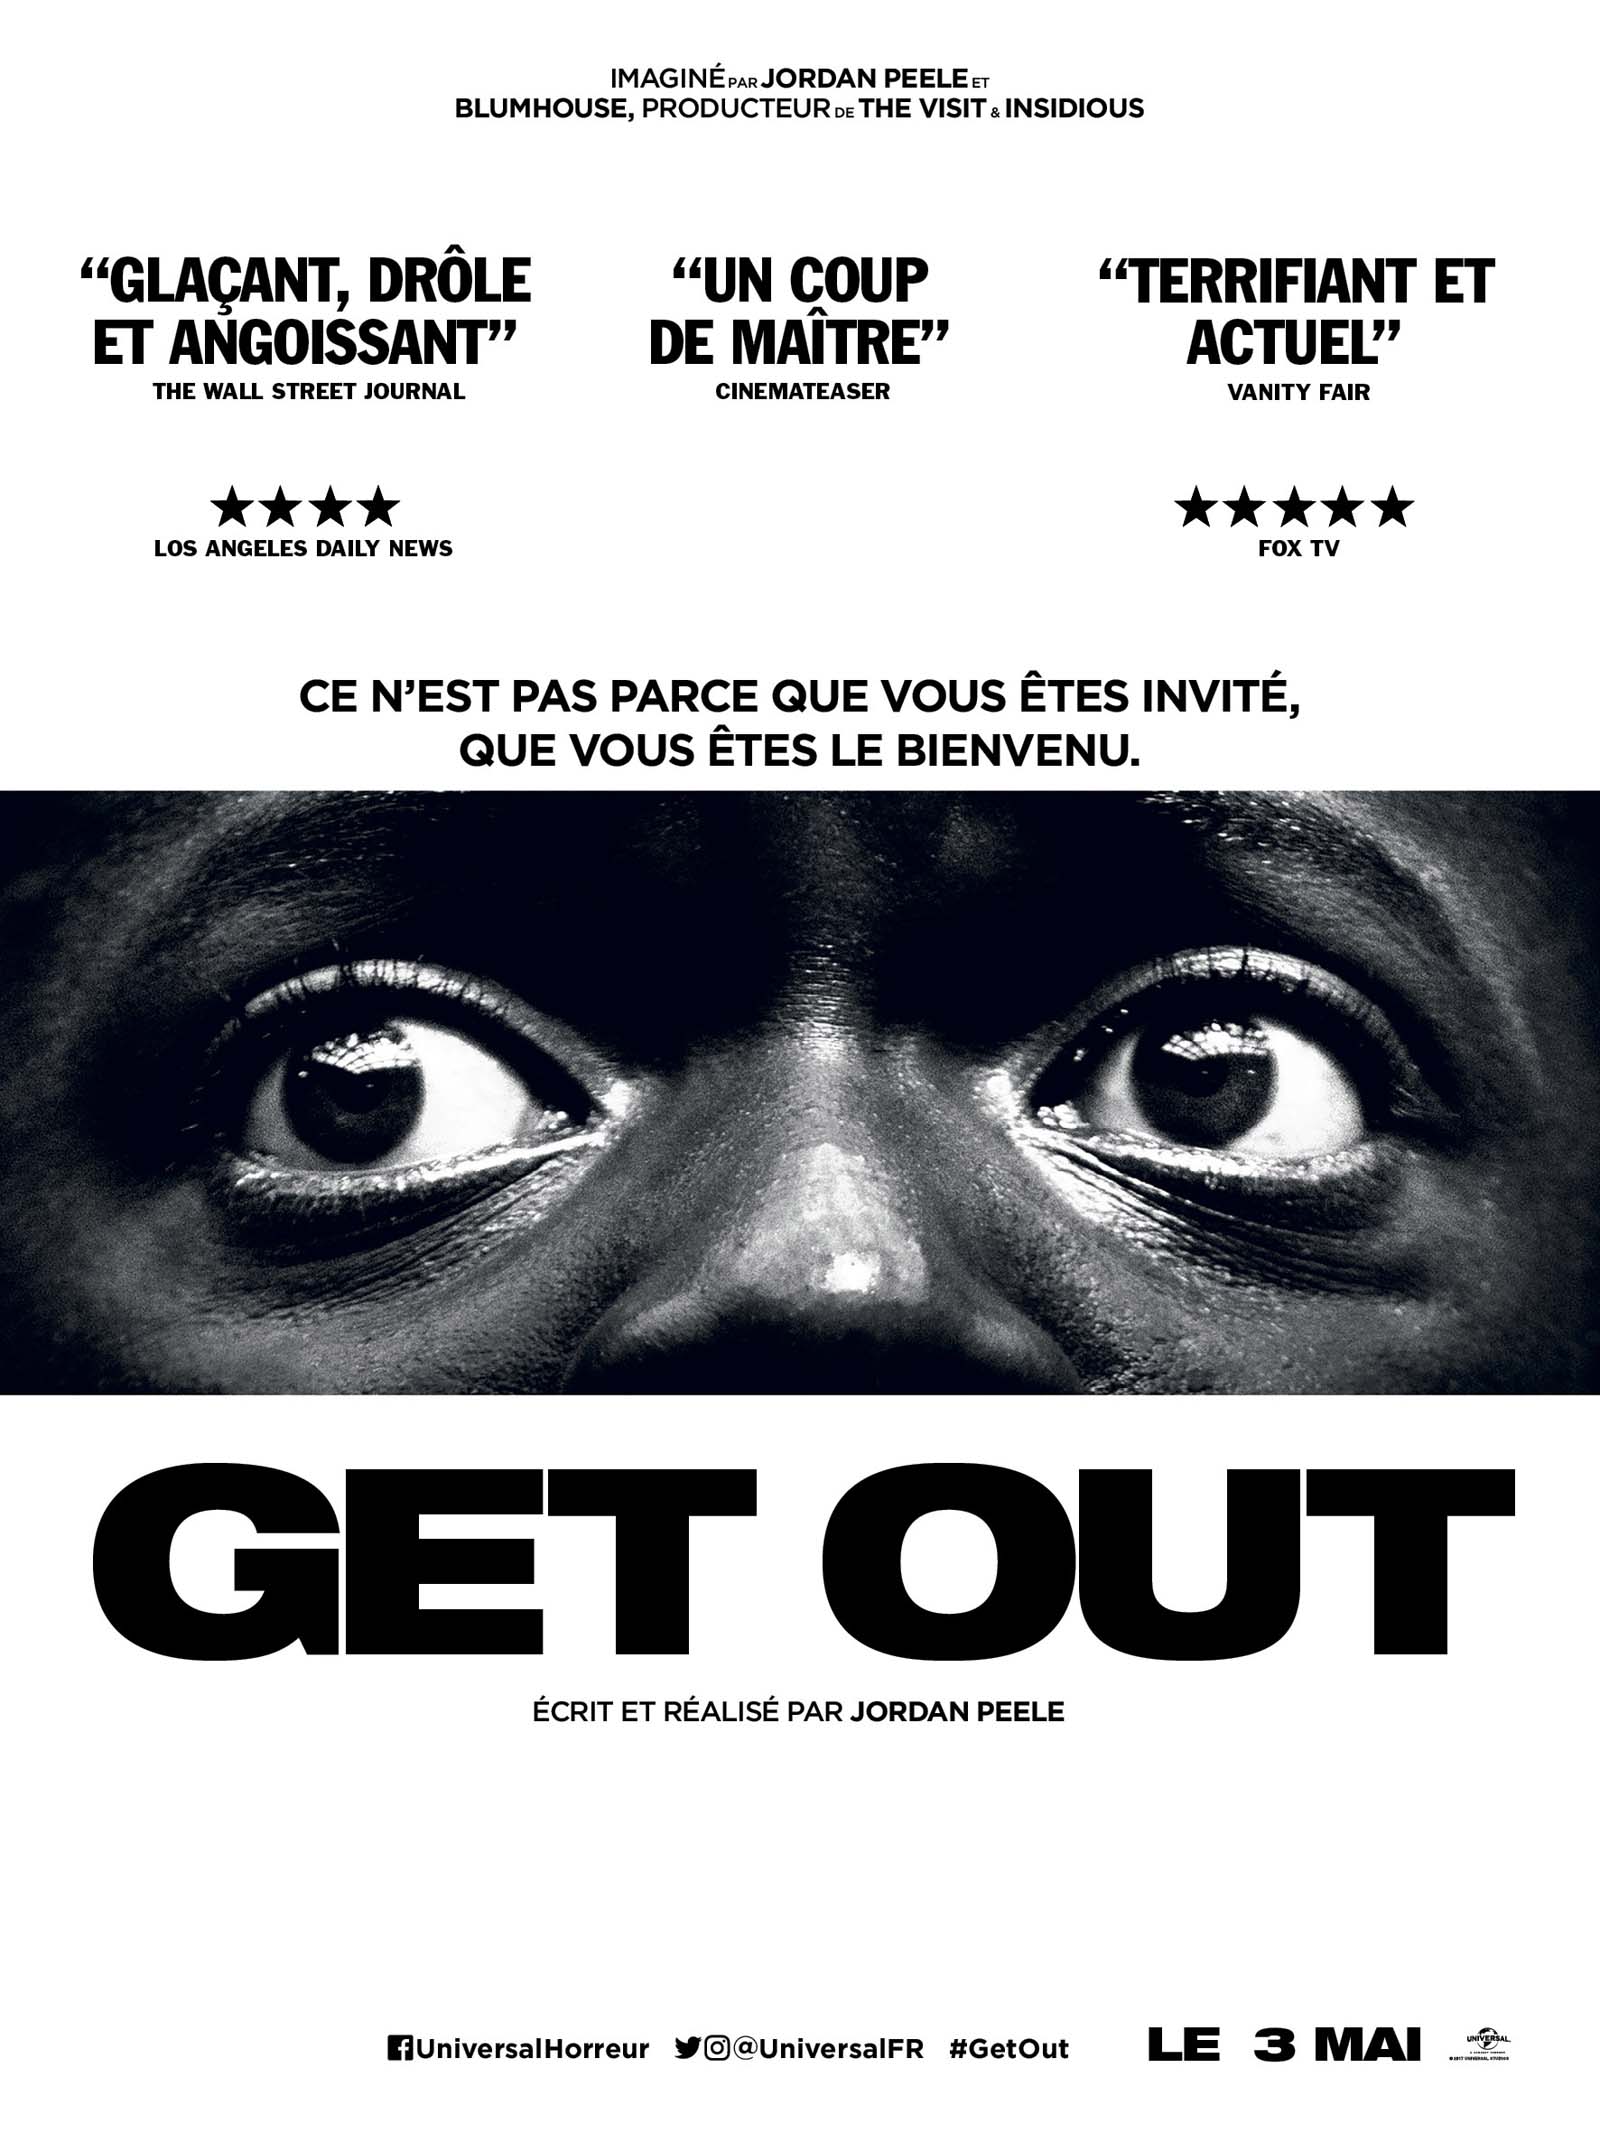 ‘Get Out’ Reviews Earn the Movie 100% on Rotten Tomatoes | Allison Williams, Daniel Kaluuya, Get ...